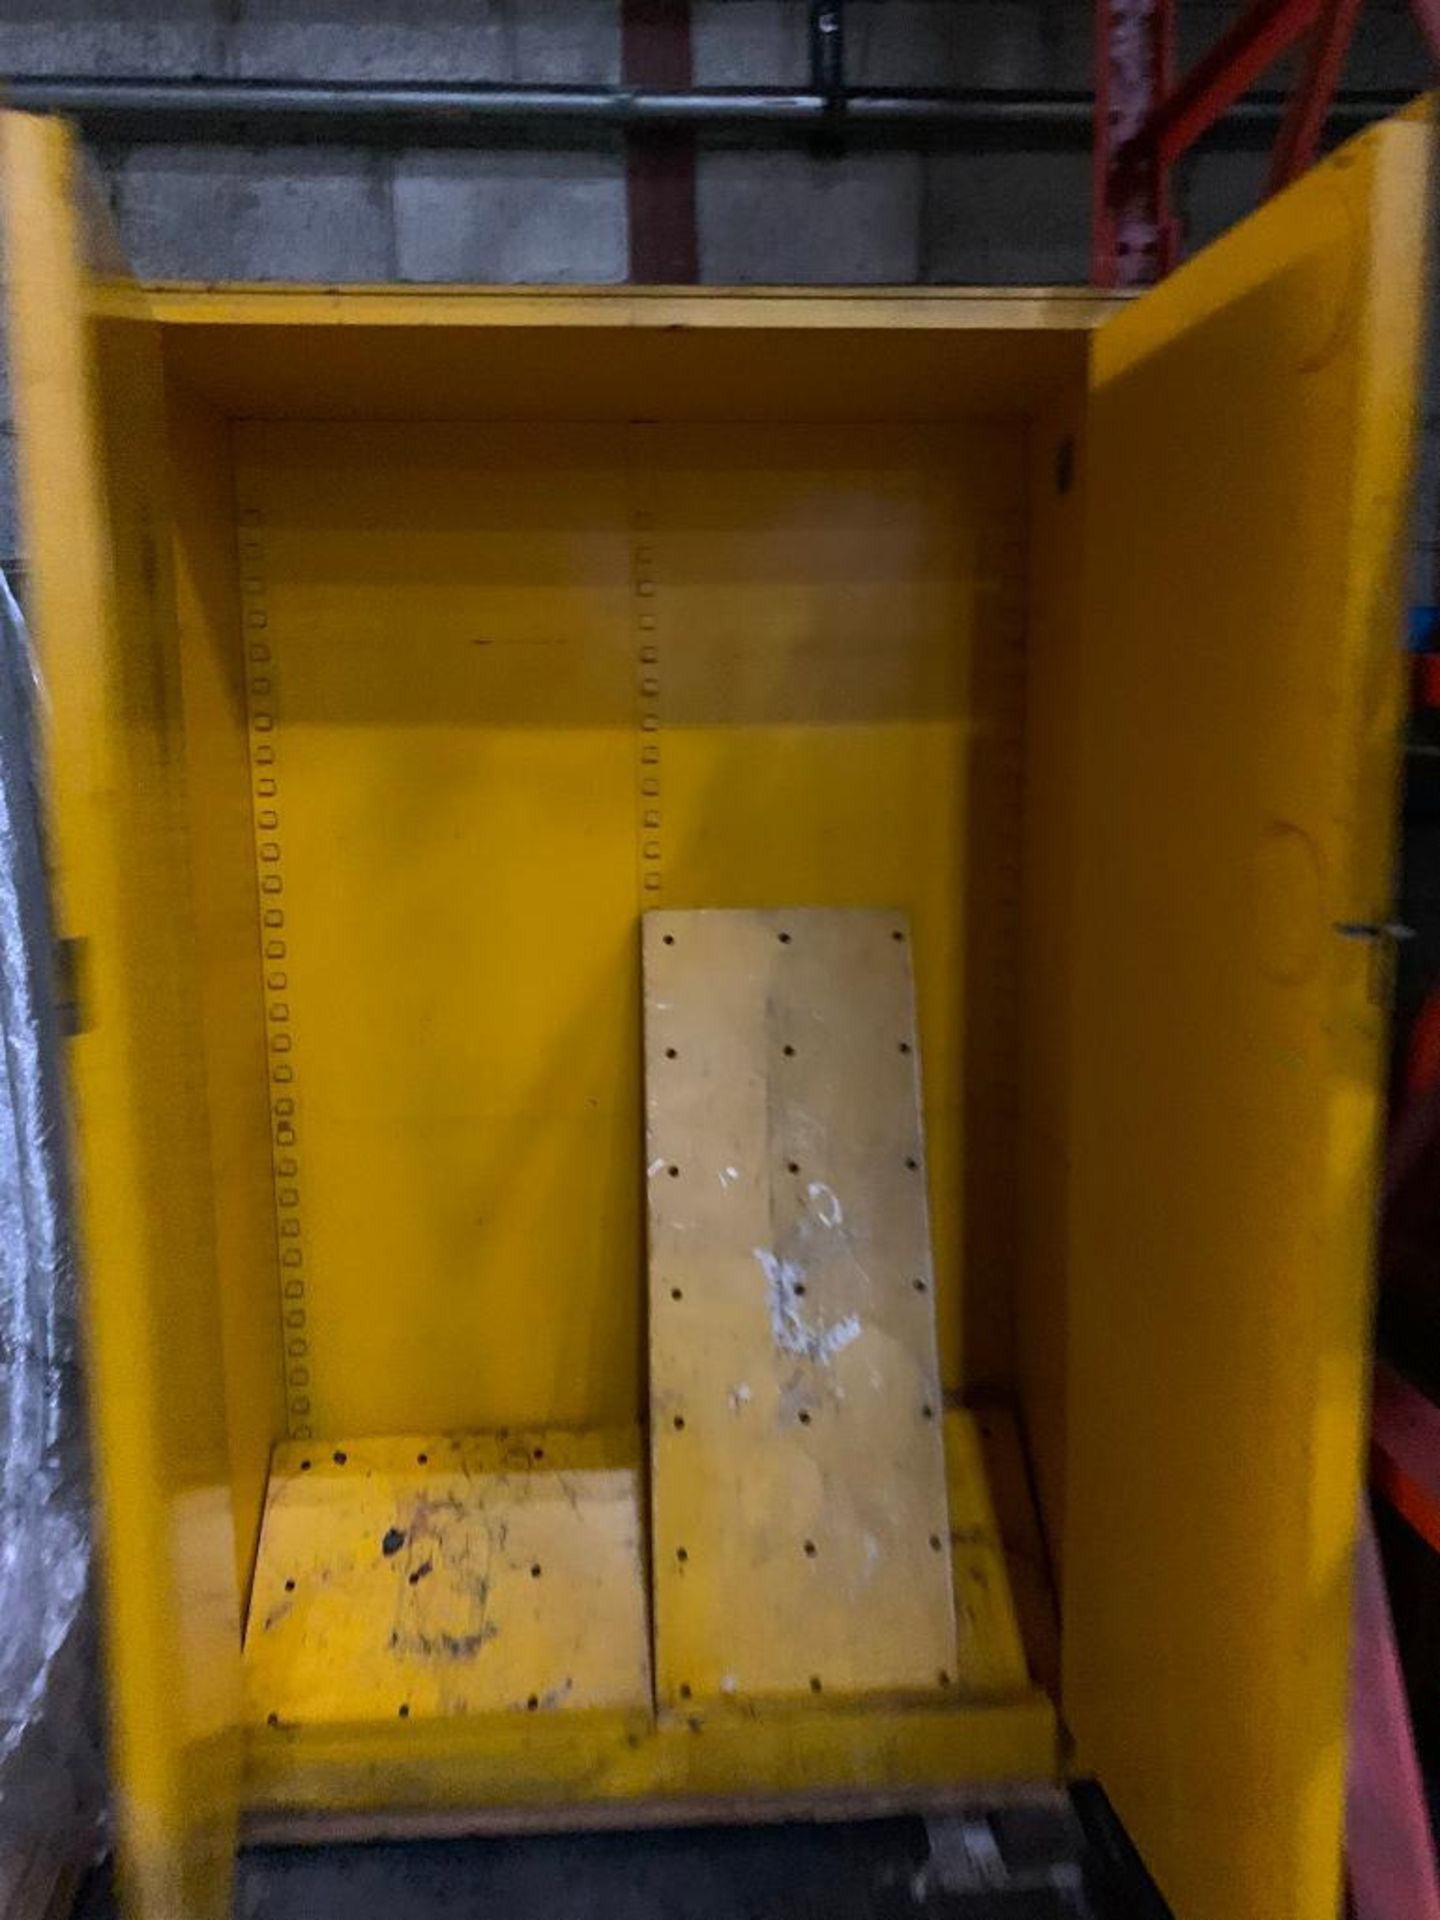 Protectaseal Flammable Storage Cabinet - Image 2 of 2